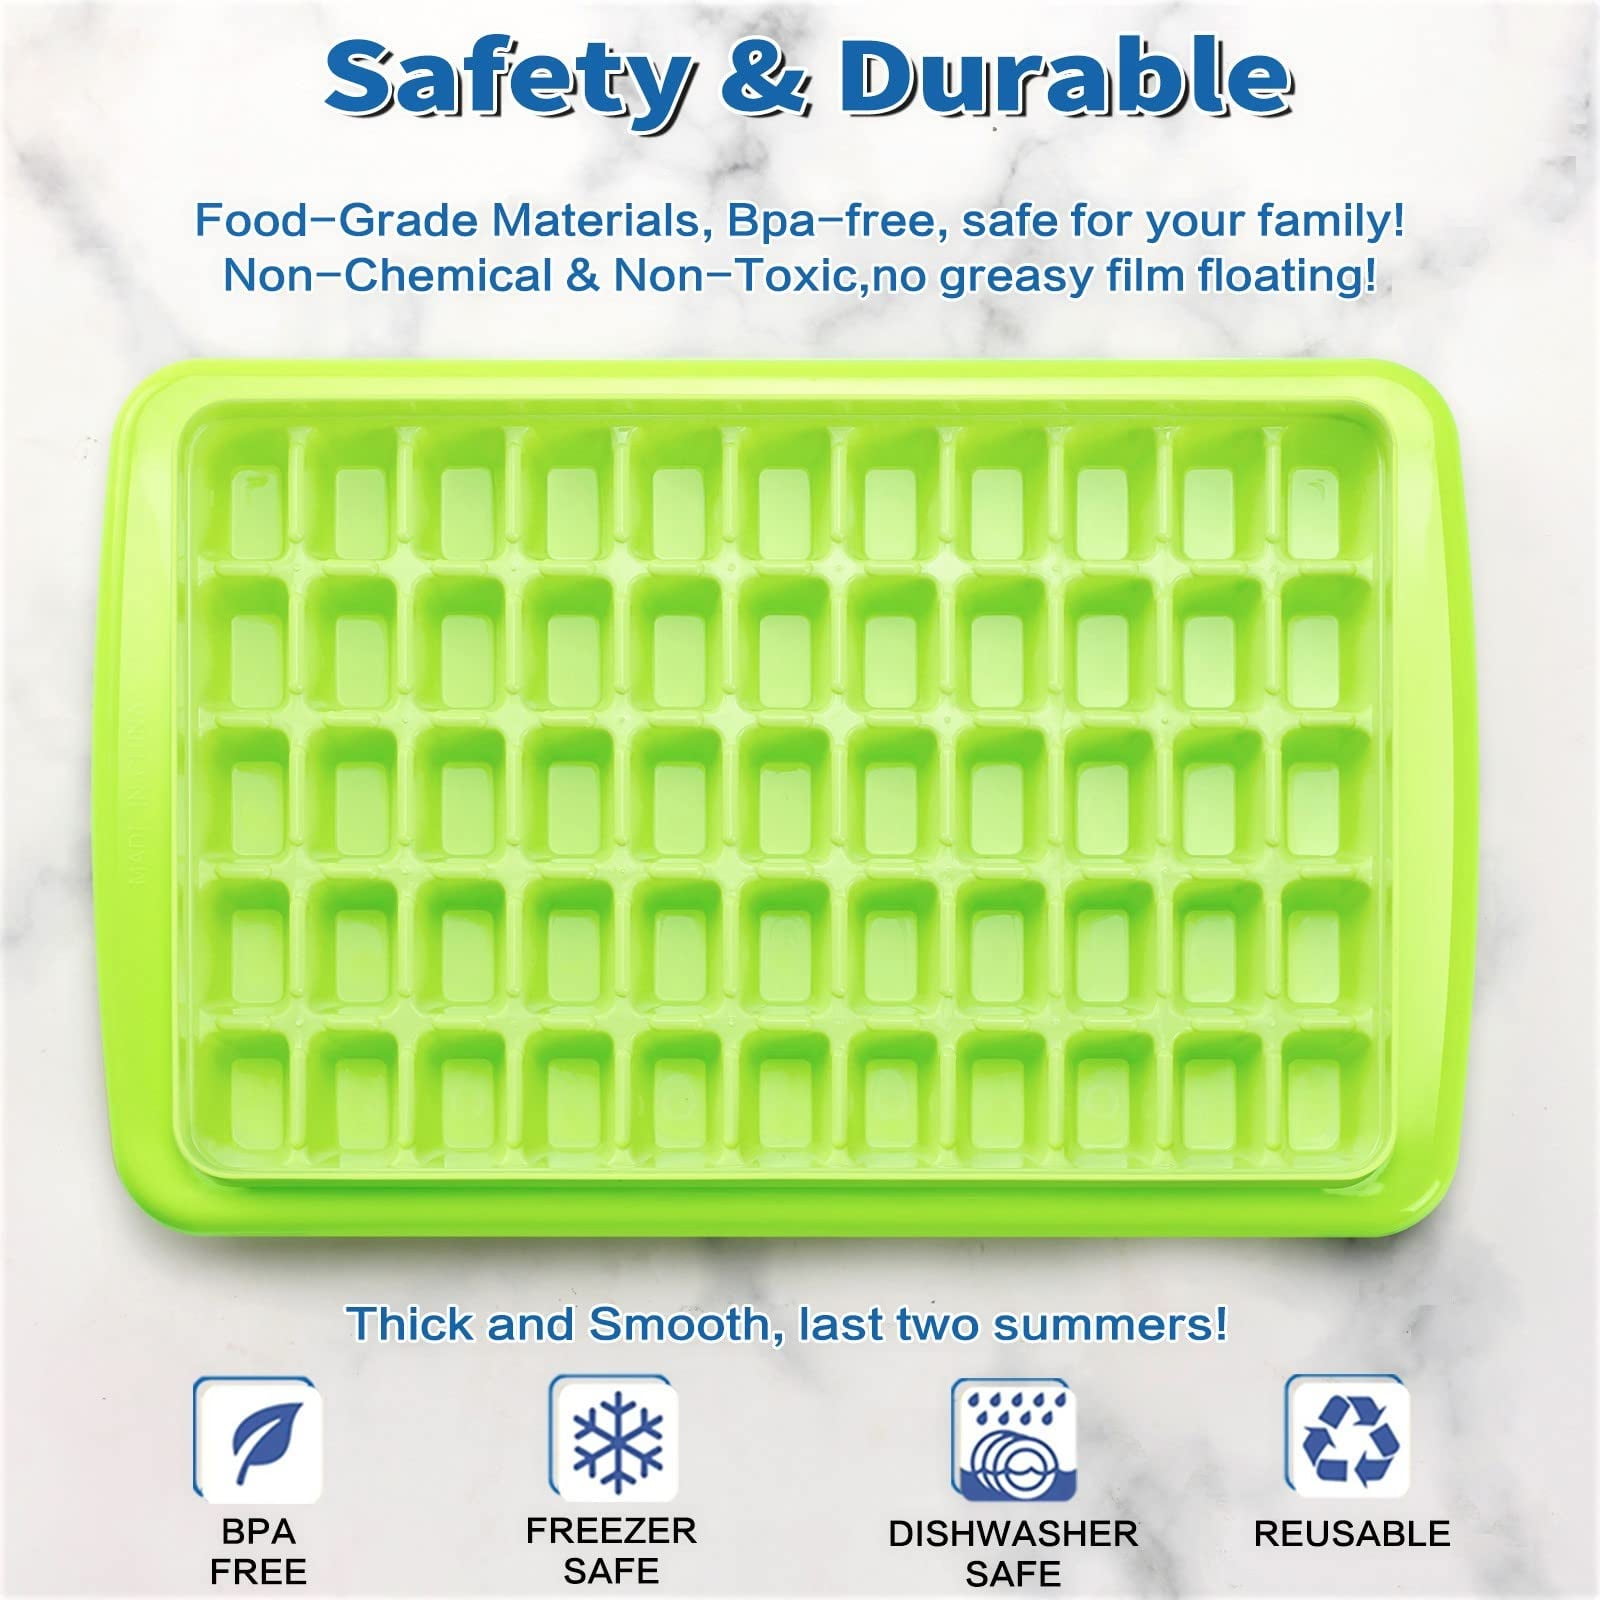 Would You Use A Stainless Steel Ice Cube Tray? » My Plastic-free Life